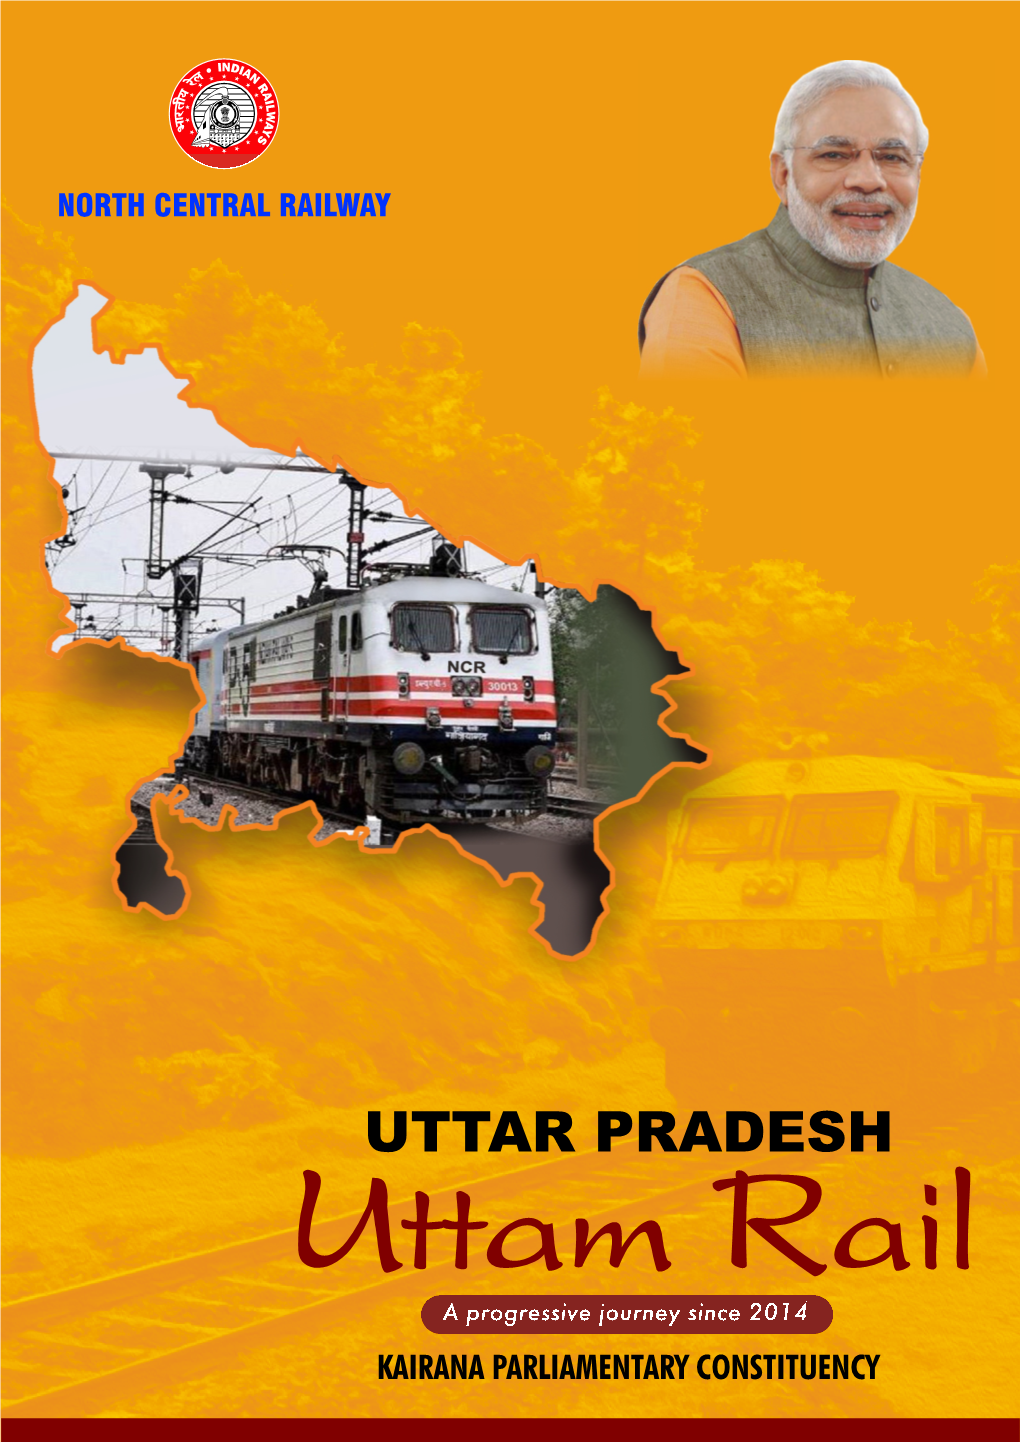 KAIRANA PARLIAMENTARY CONSTITUENCY Uttar Pradesh, the Most Populous State of Nation Is Served by North Central Railway Along with Northern, North Eastern M